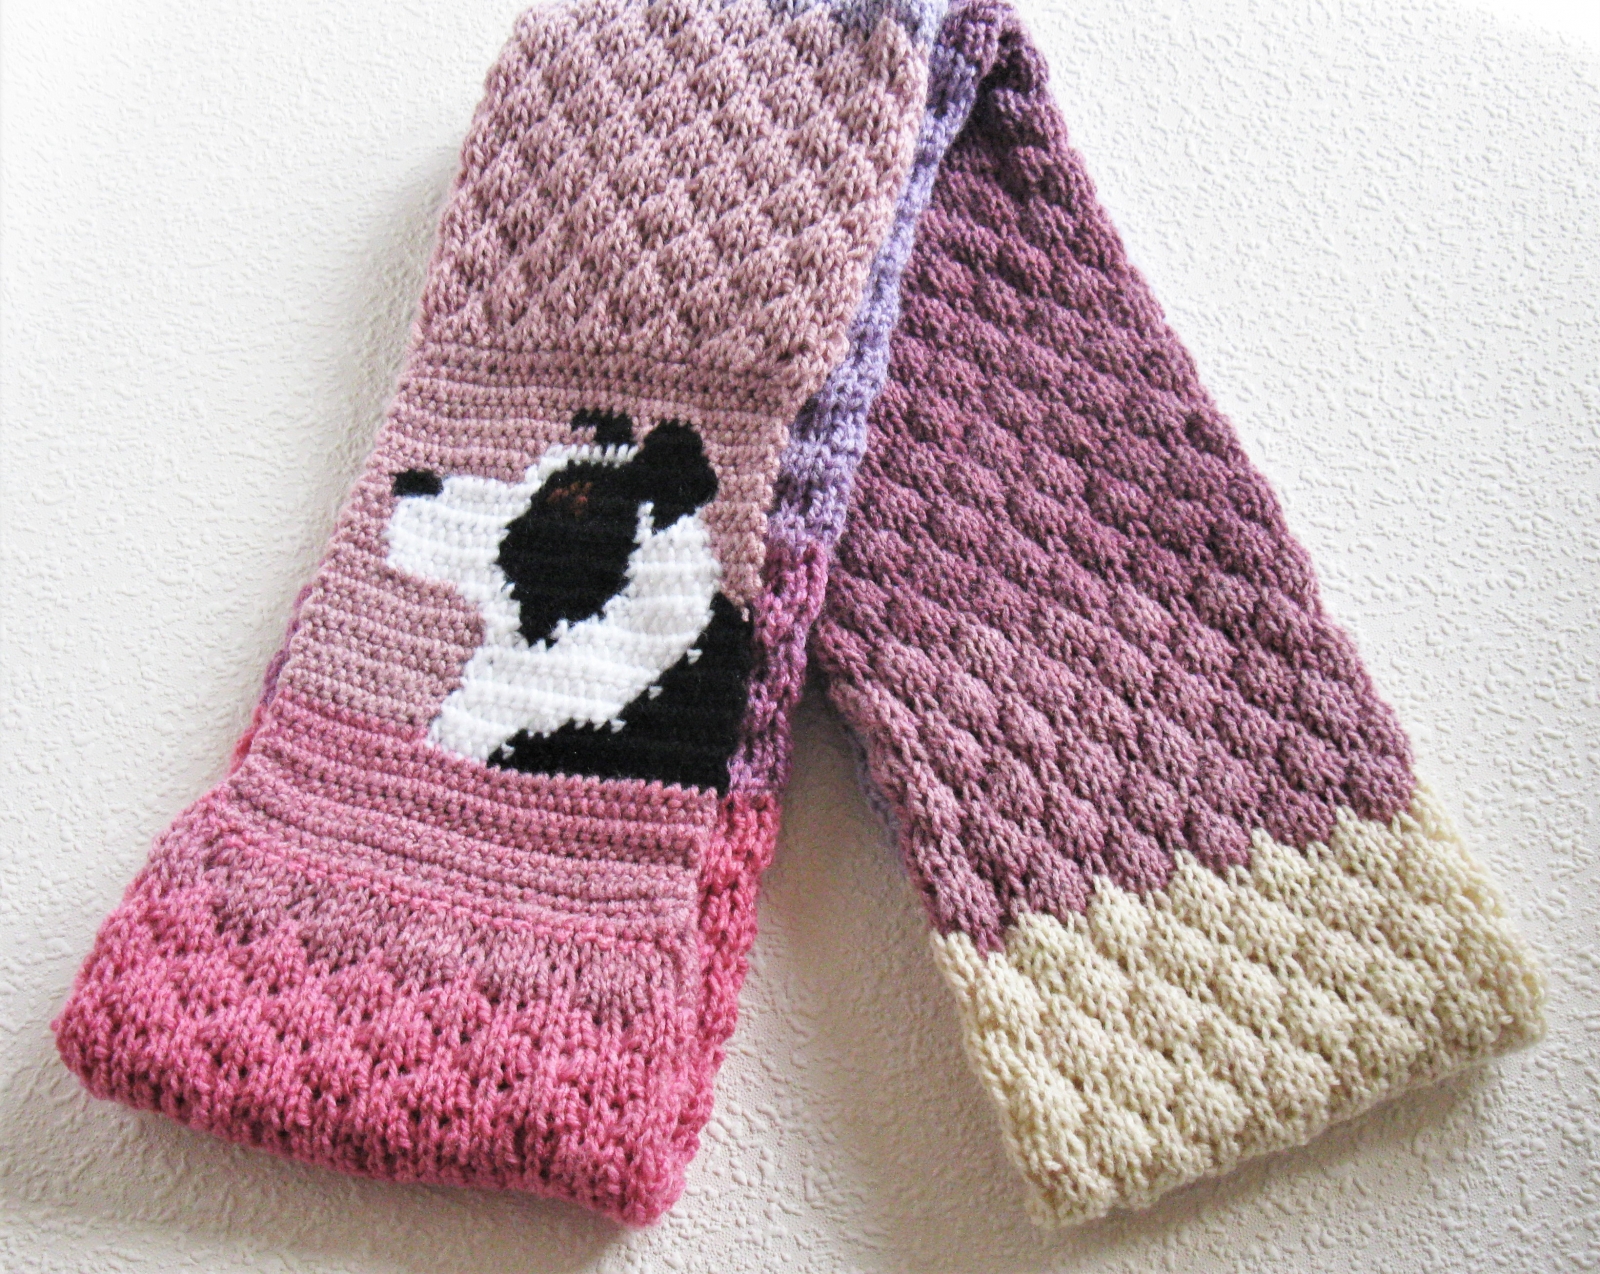 Border collie infinity scarf. Knit color block circle cowl with a black